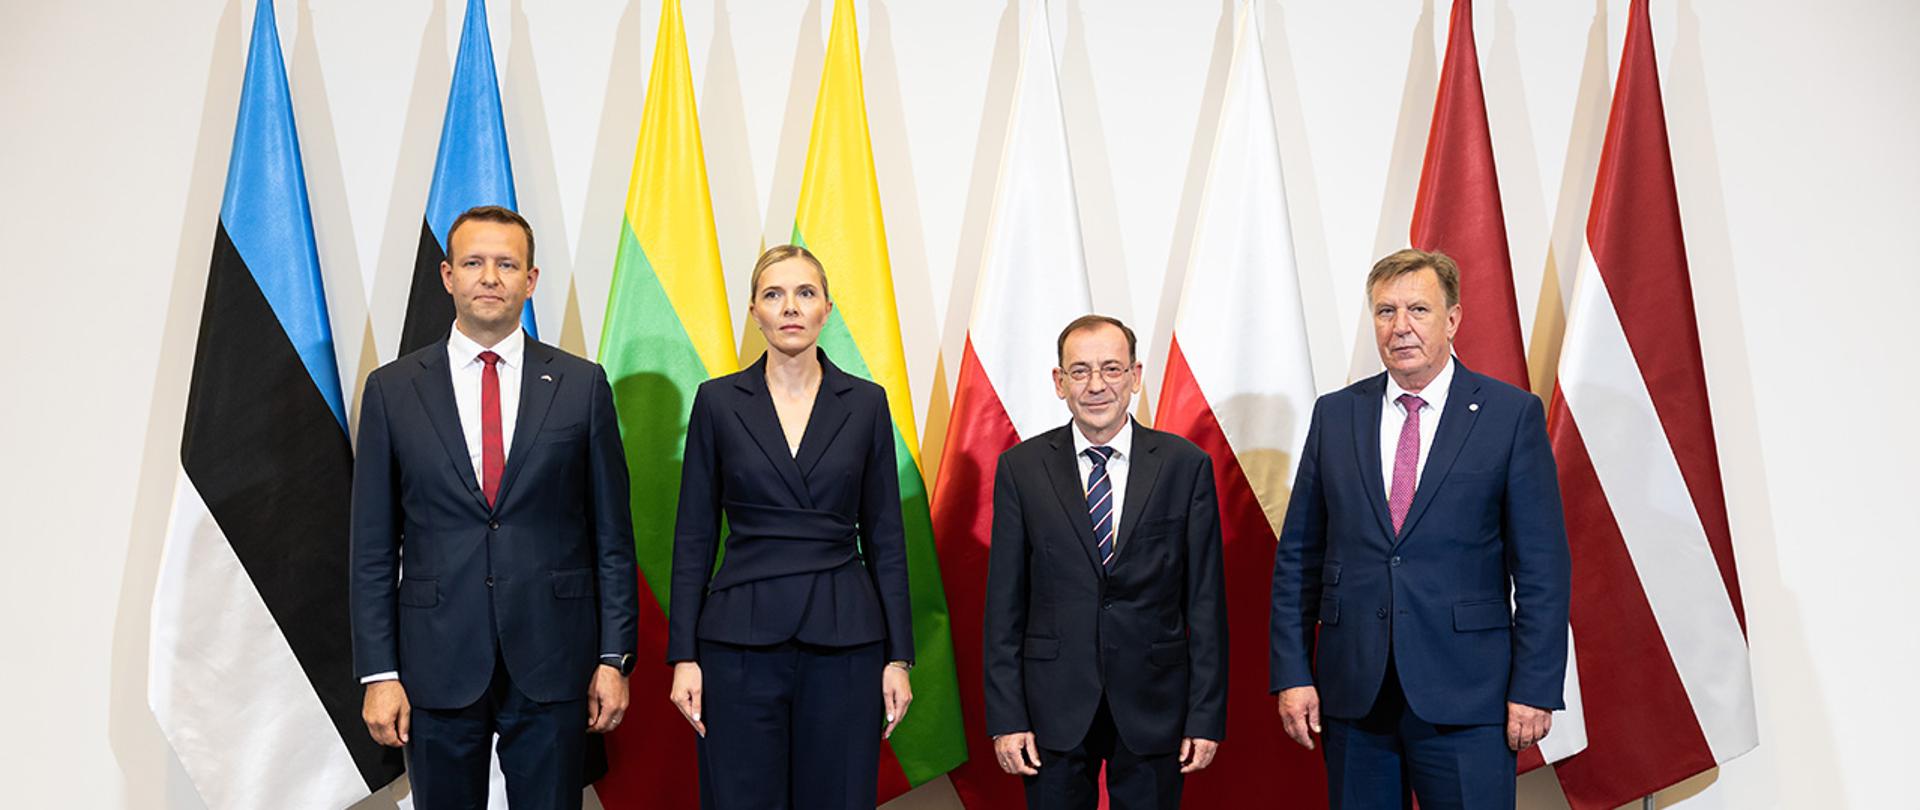 The meeting of the Ministers of the Interior of Poland, Lithuania, Latvia and Estonia